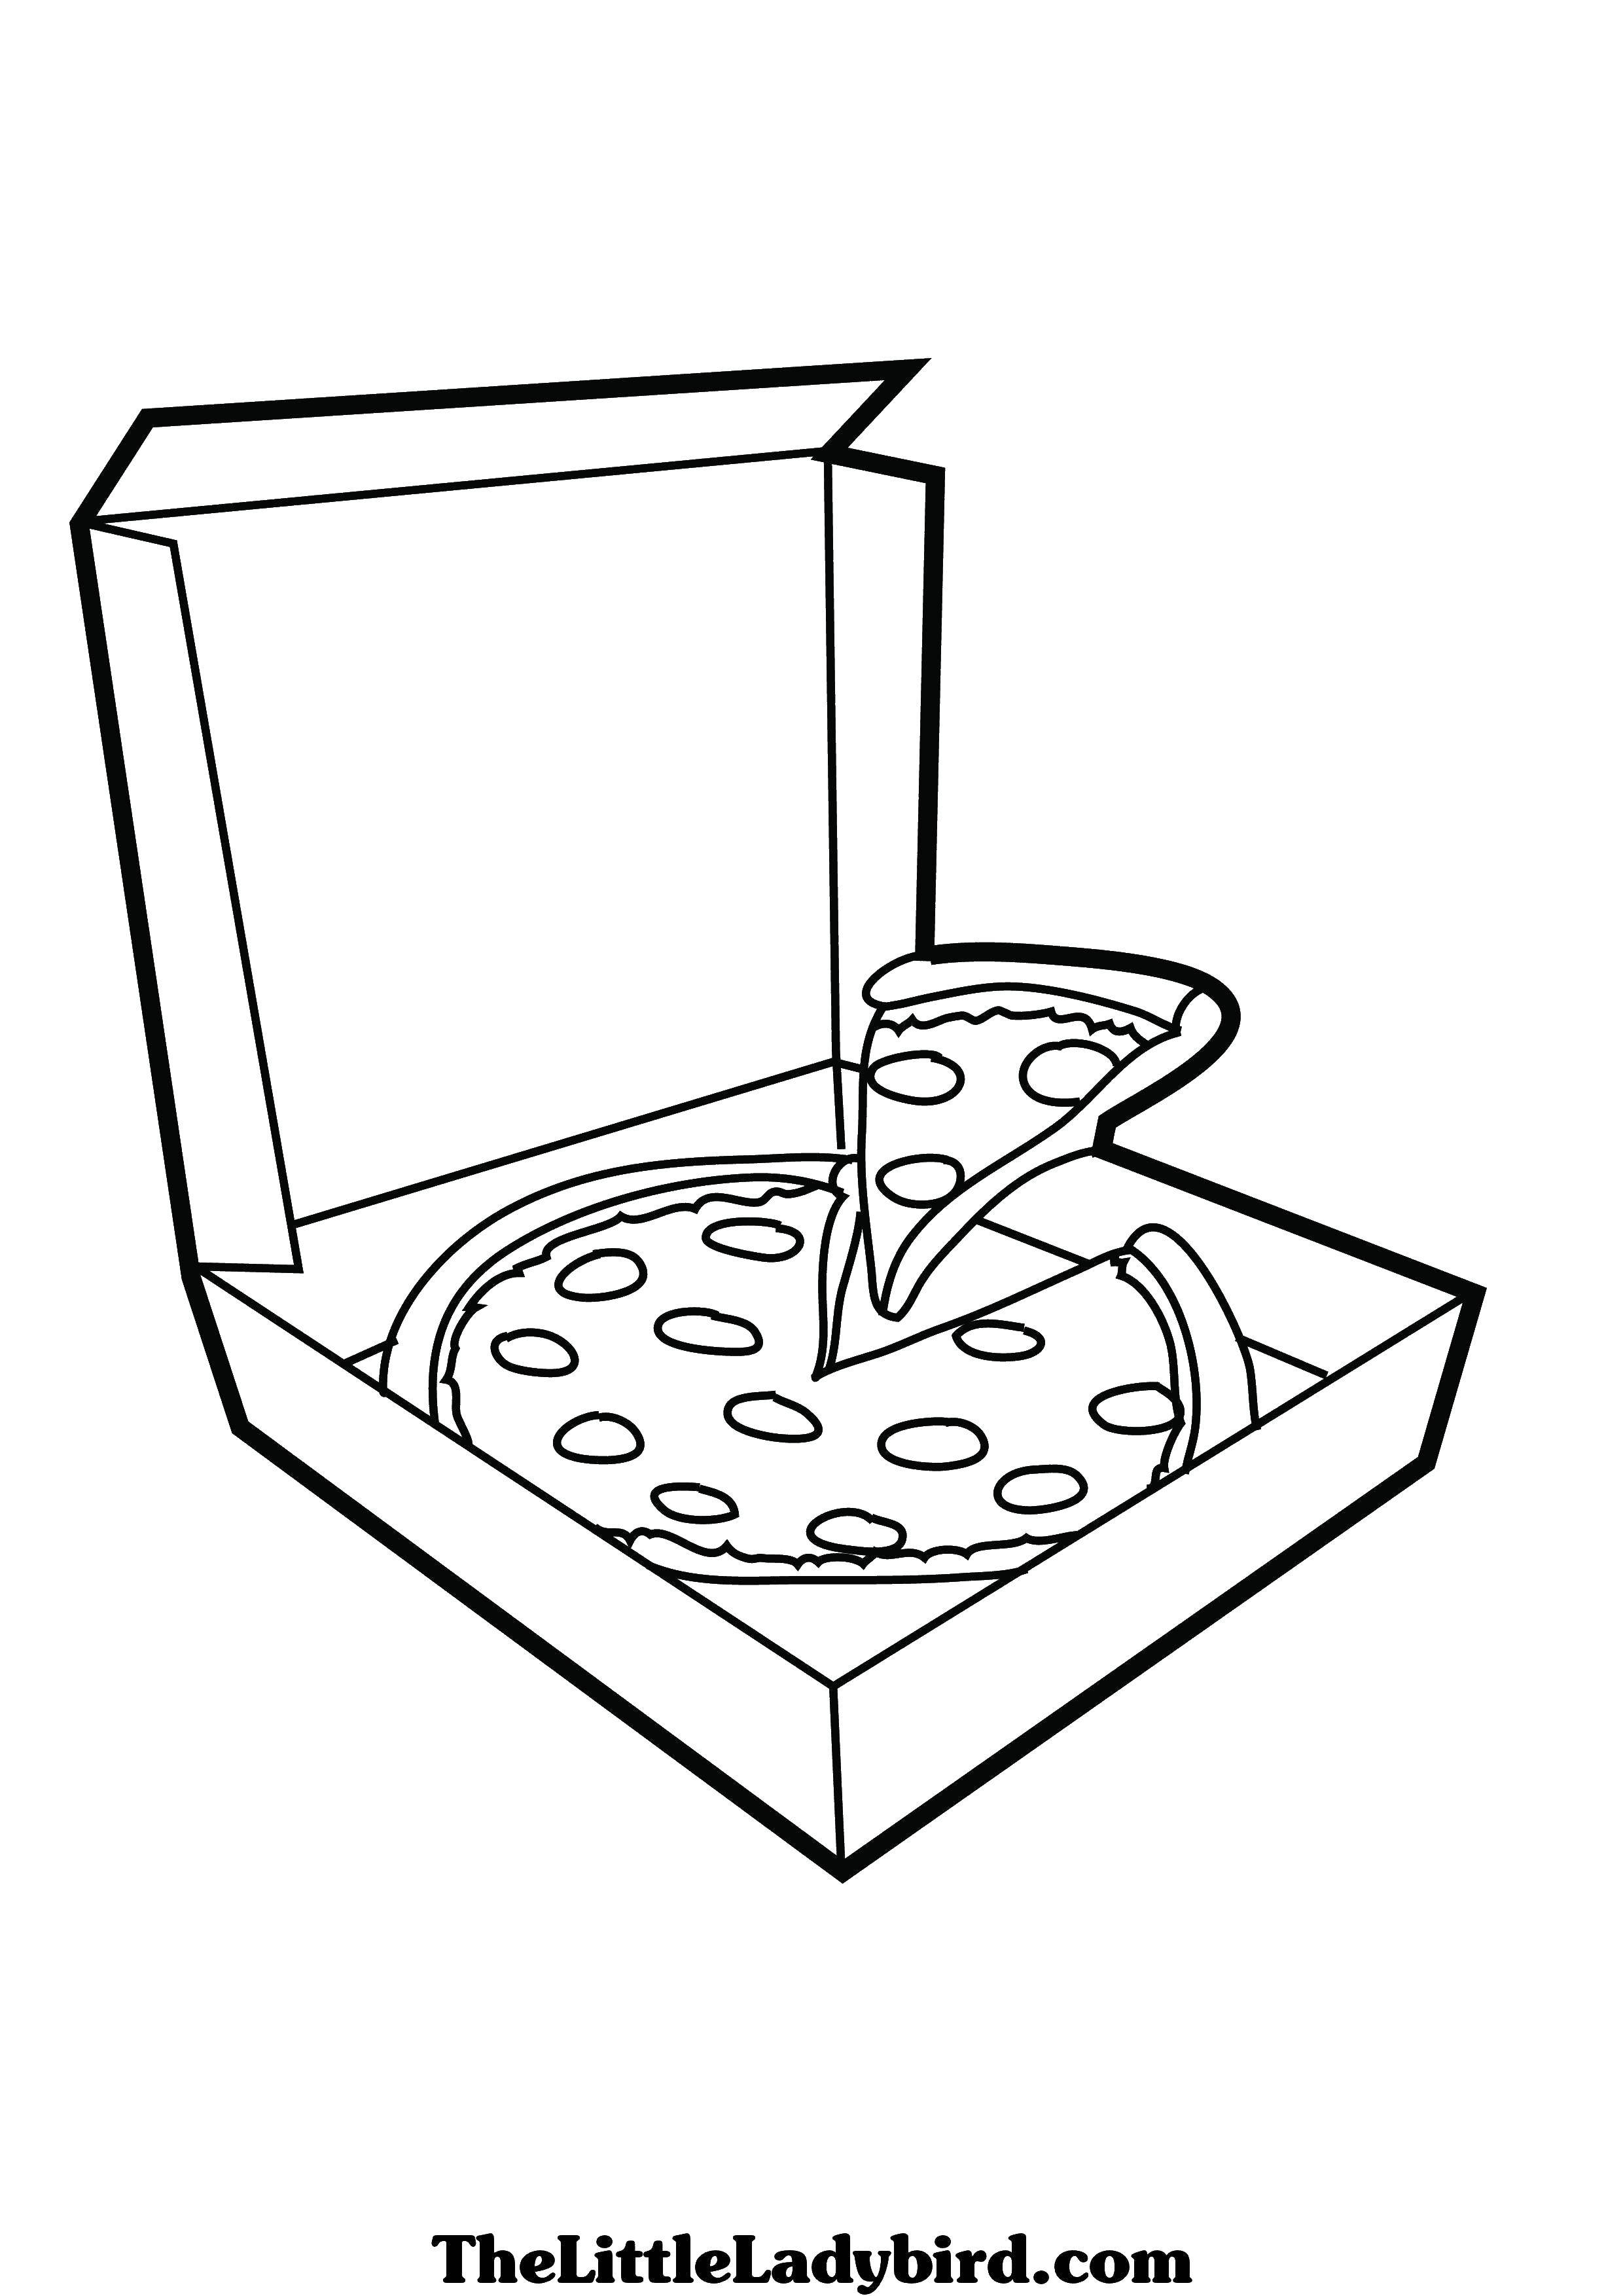 Coloring Pizza. Category The food. Tags:  food, pizza.